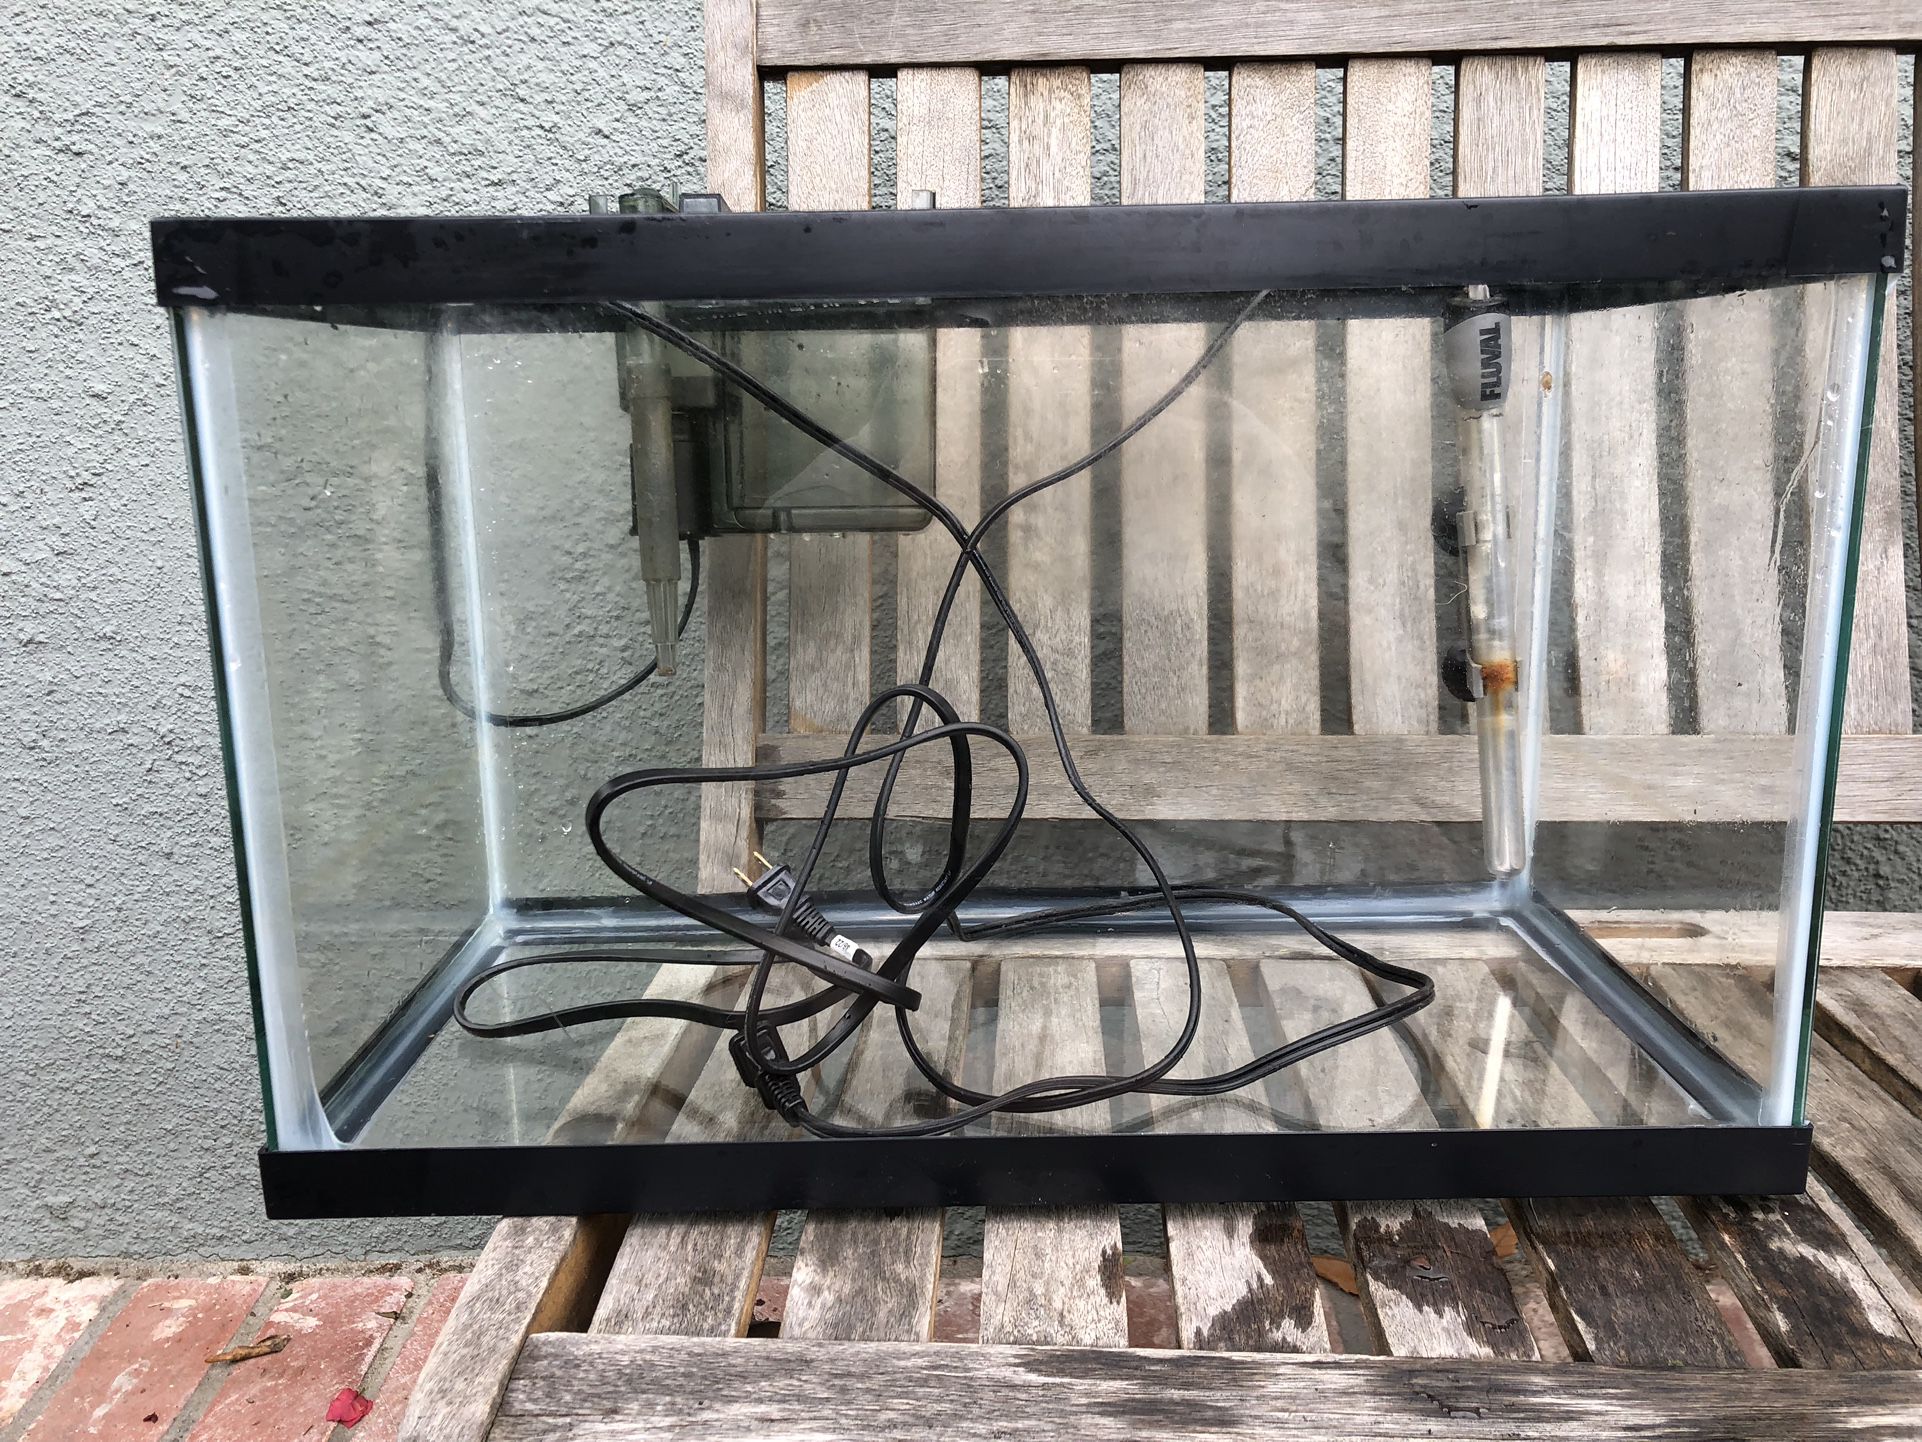 10 Gallon Fish Tank With Heater And Filter